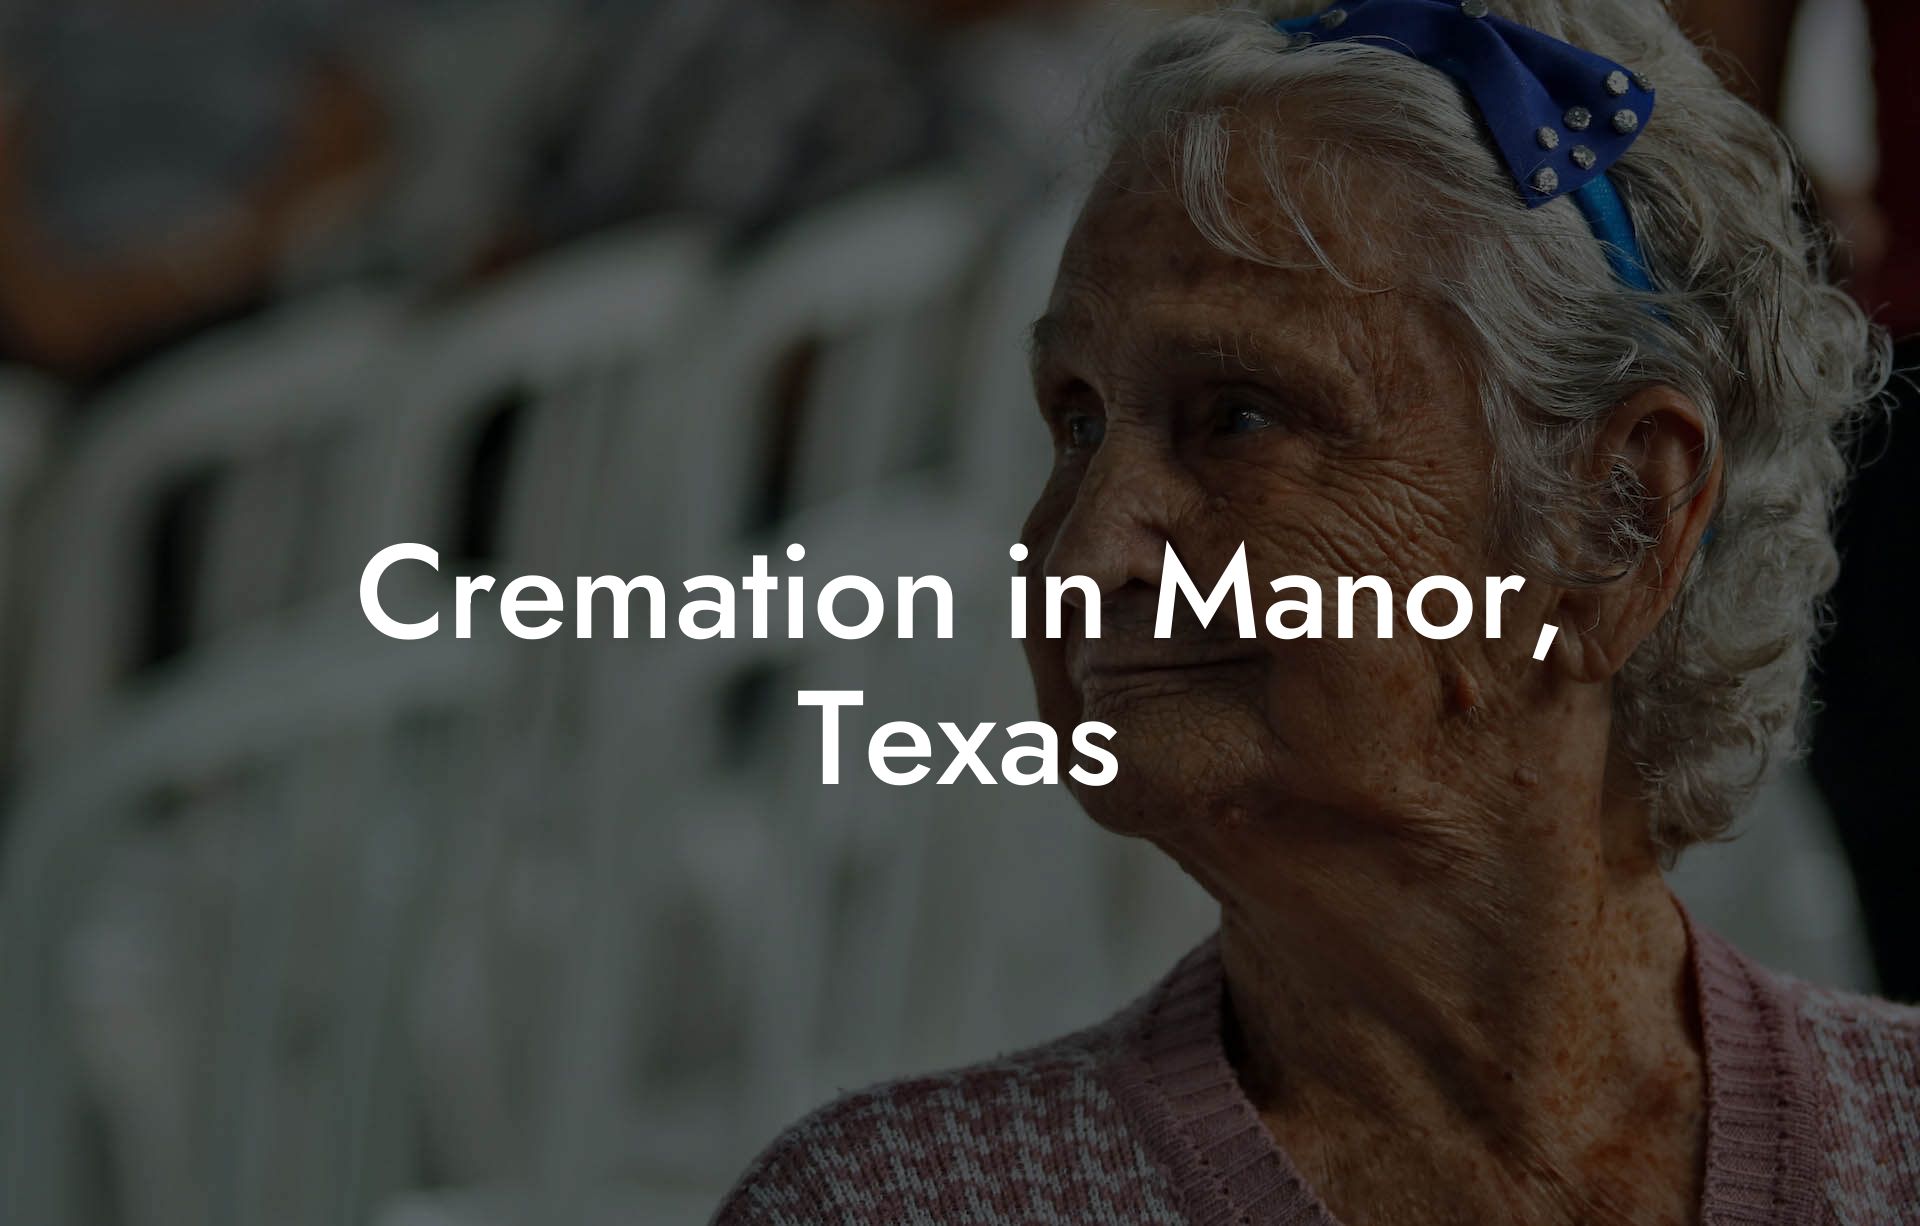 Cremation in Manor, Texas